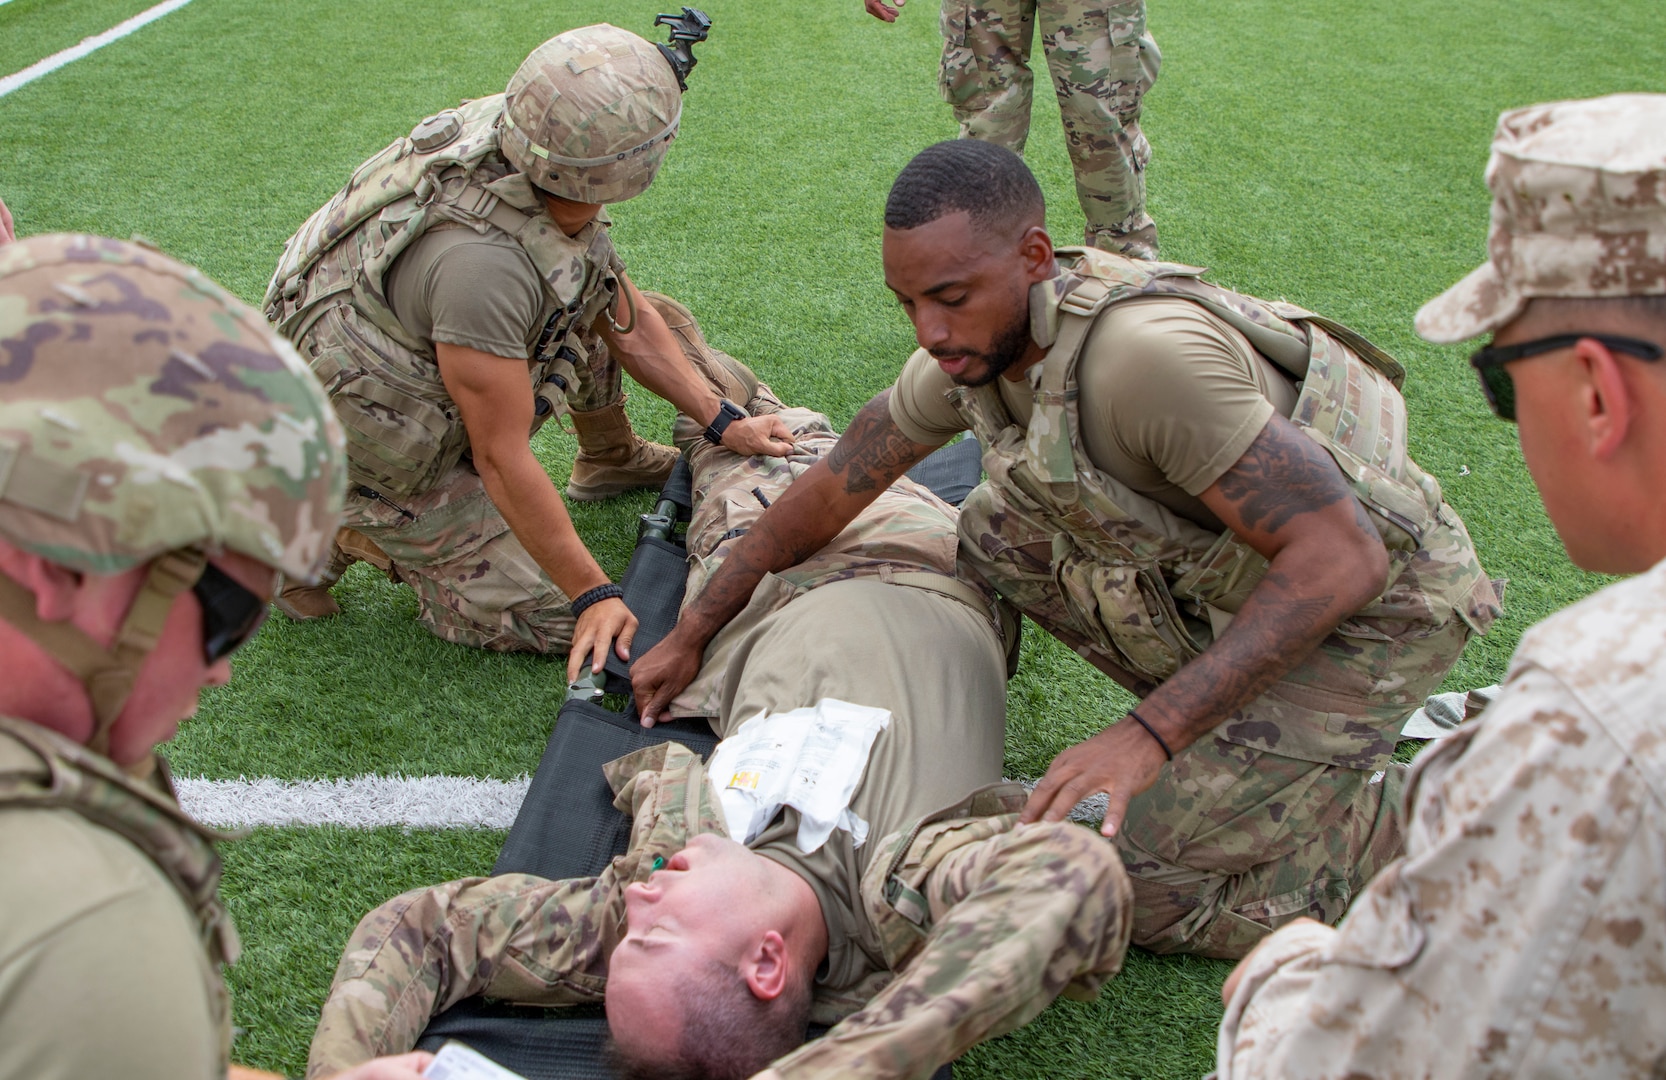 U.S. Army Soldiers roll a simulated casualty onto a litter during the culminating exercise for a Combat Lifesaver Course hosted by combat medics, with 38th Infantry Division, Task Force Spartan, Indiana National Guard, at Joint Training Center-Jordan Oct. 16, 2019.